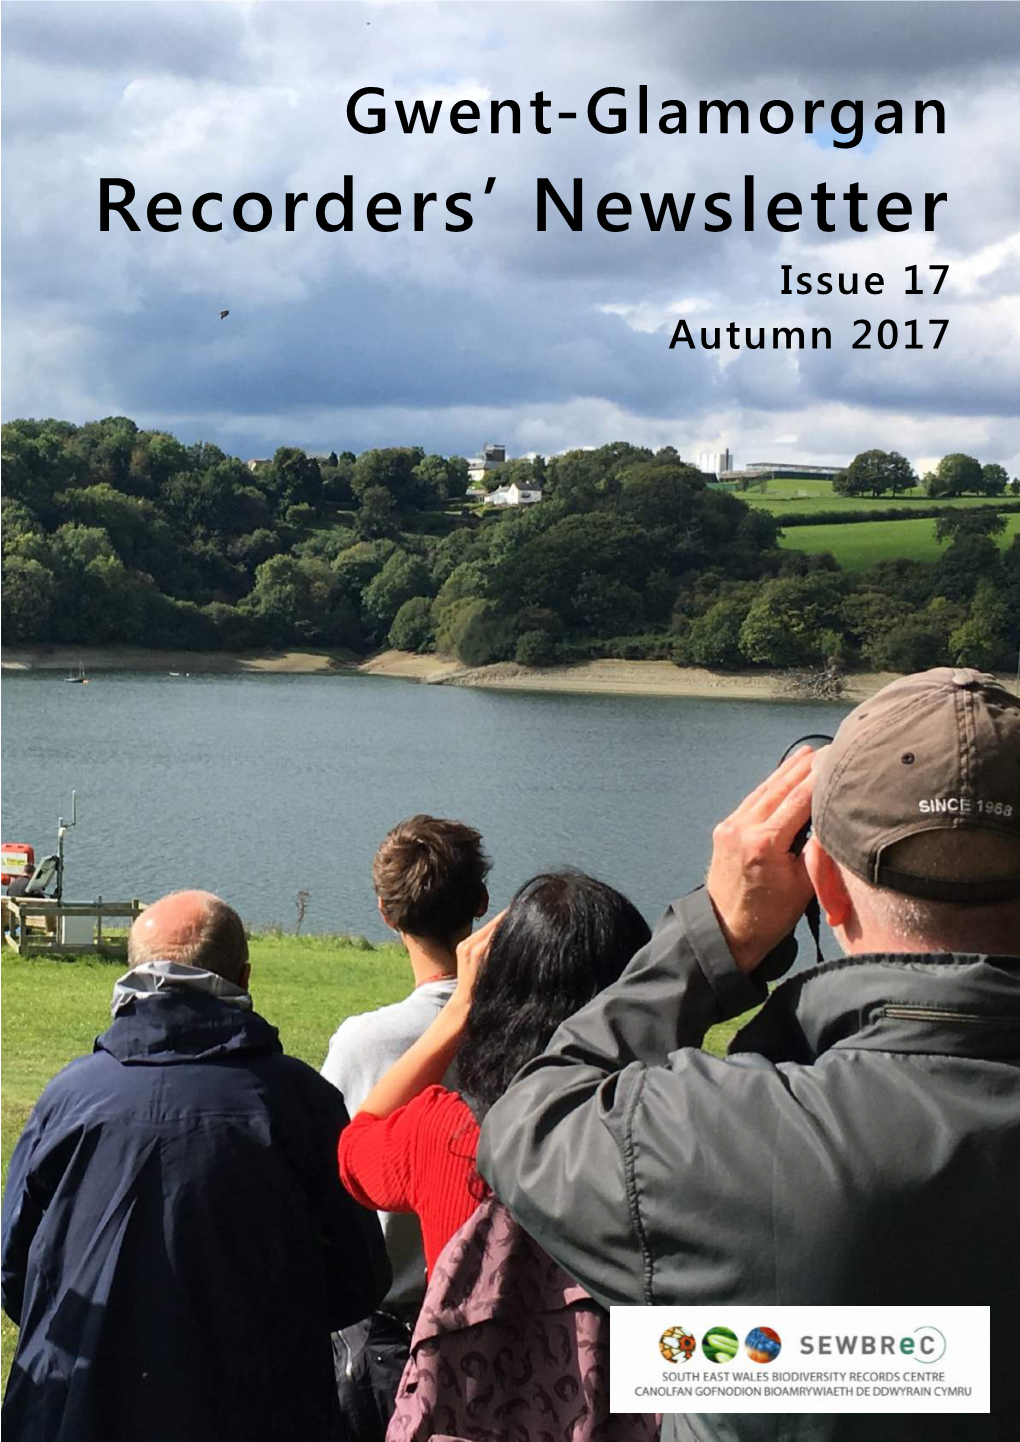 Gwent-Glamorgan Recorders' Newsletter Issue 17